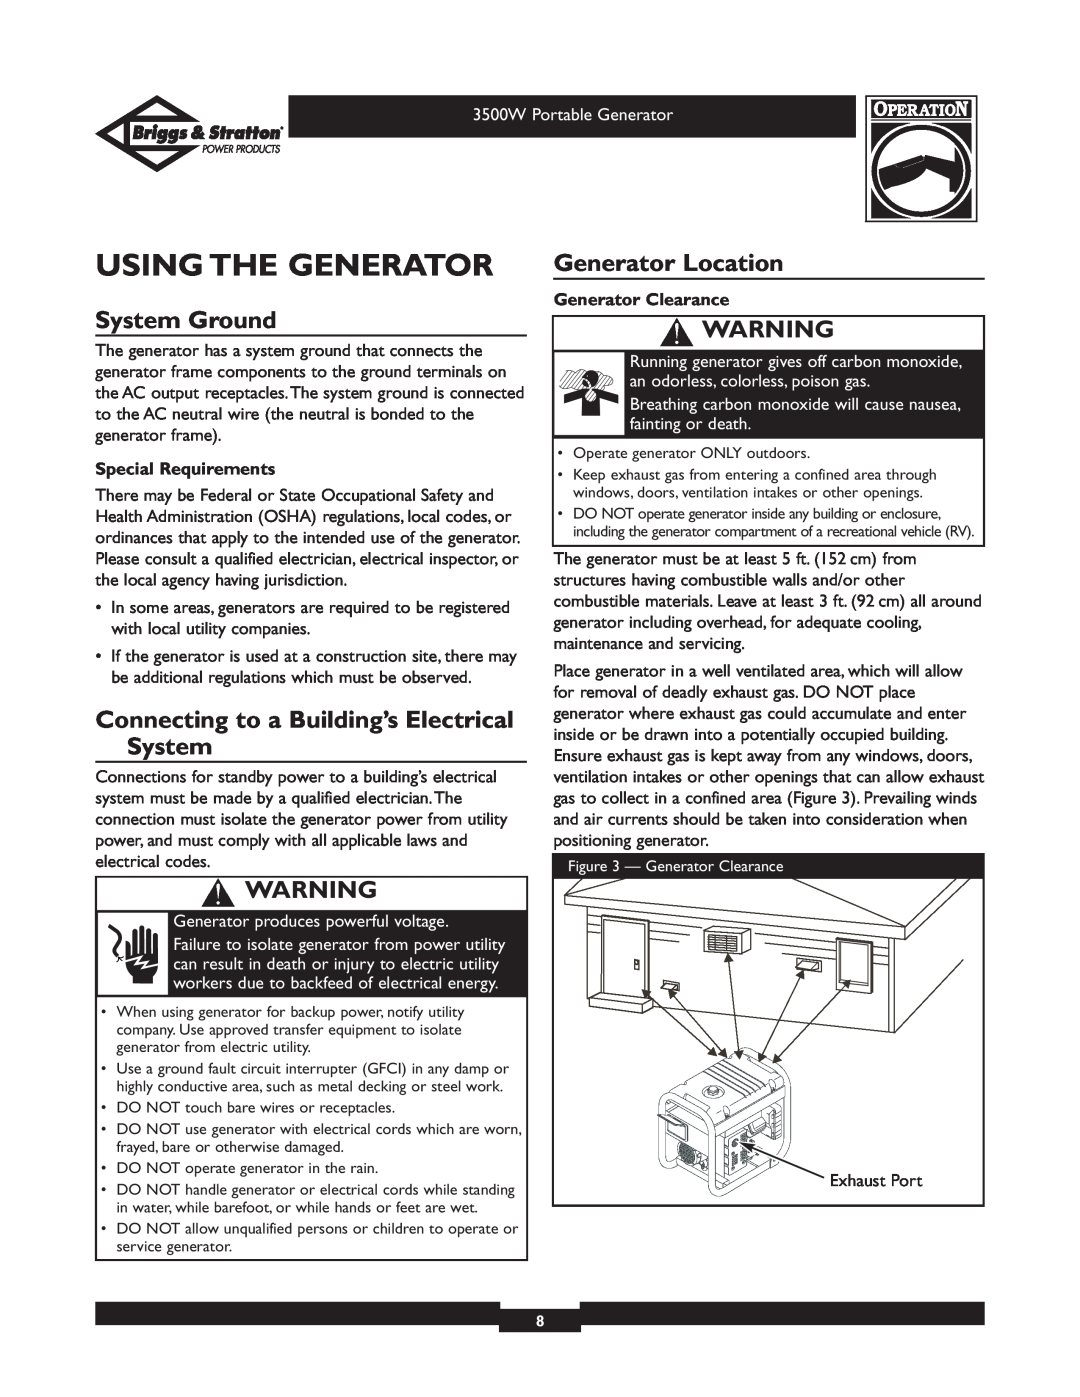 Briggs & Stratton 30208 owner manual Using The Generator, System Ground, Connecting to a Building’s Electrical System 